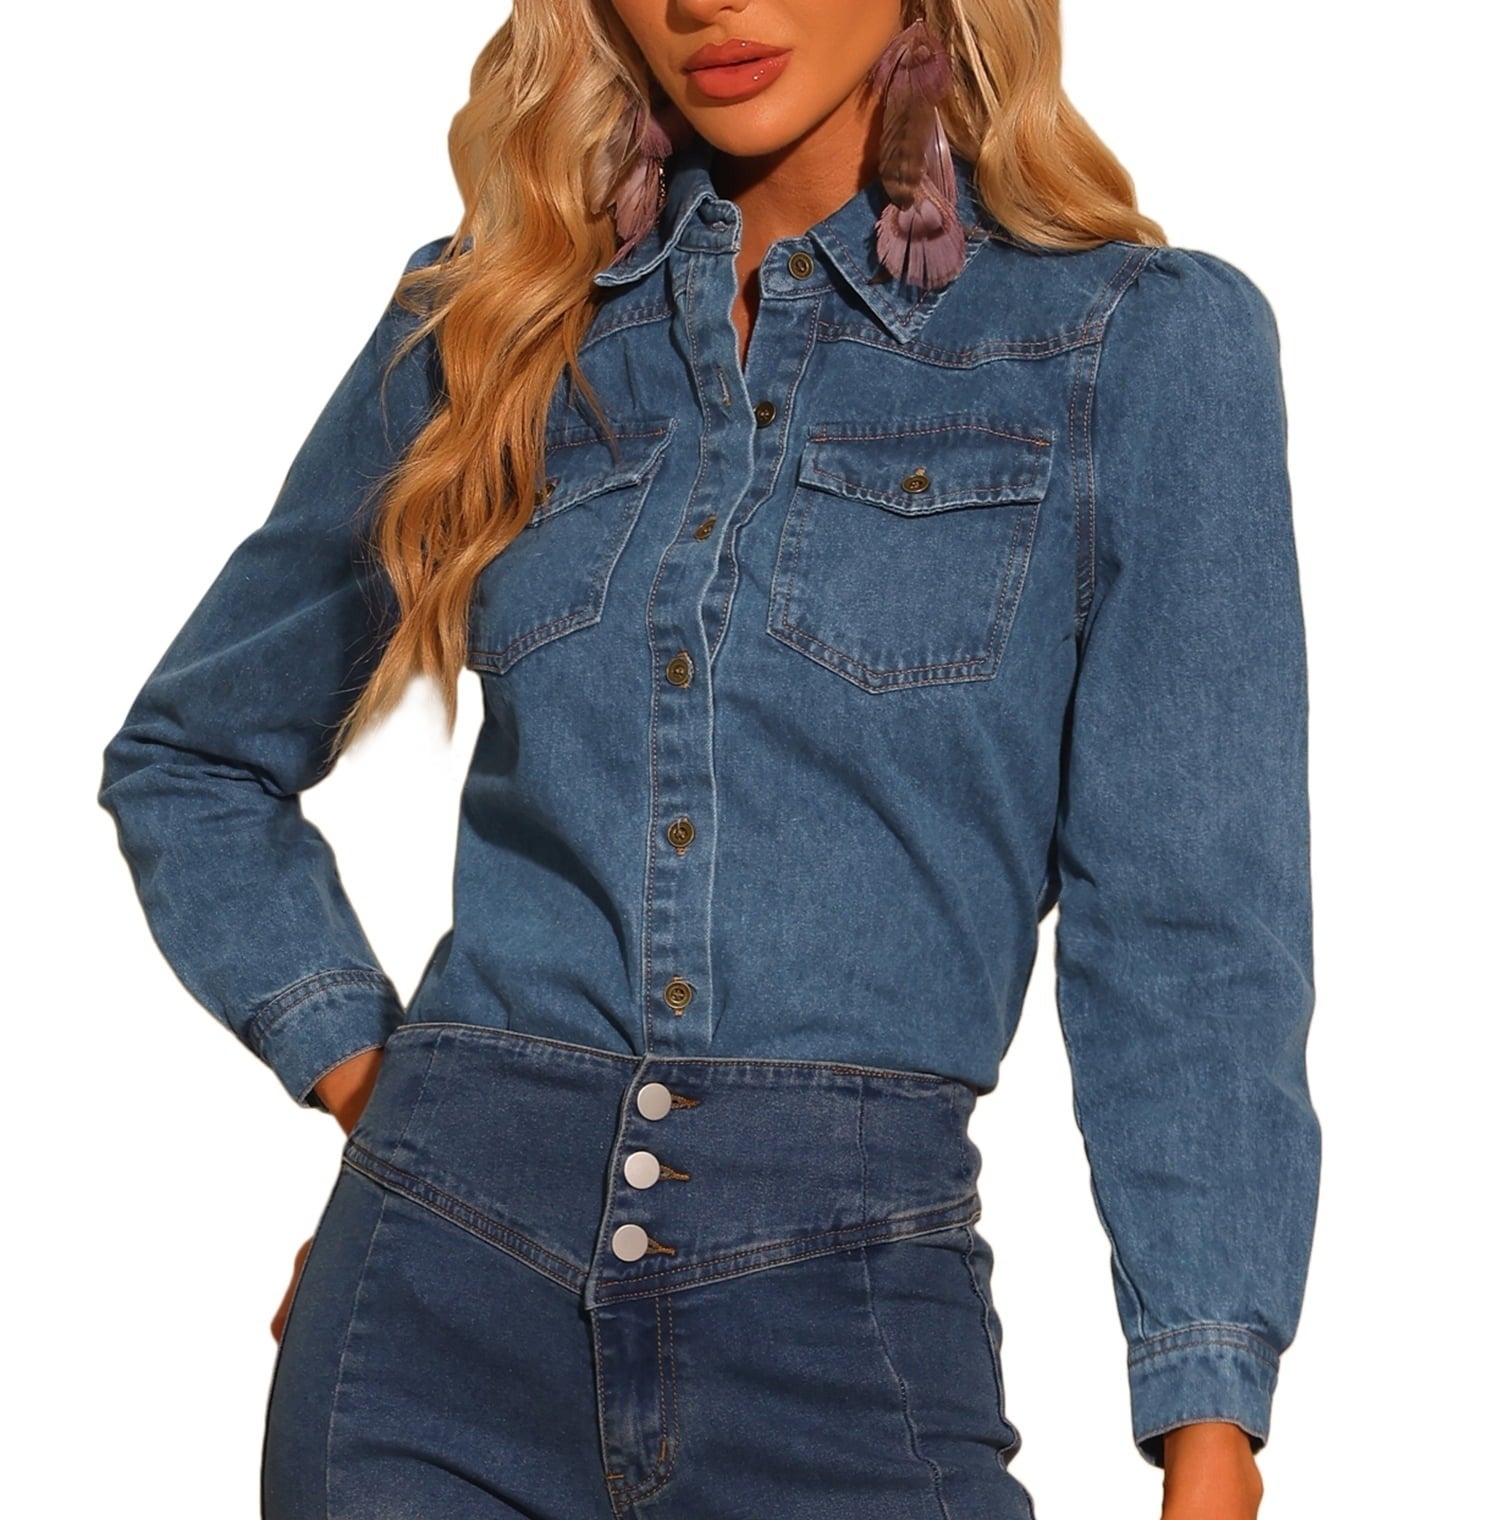 model in a denim shirt and high-waisted jeans